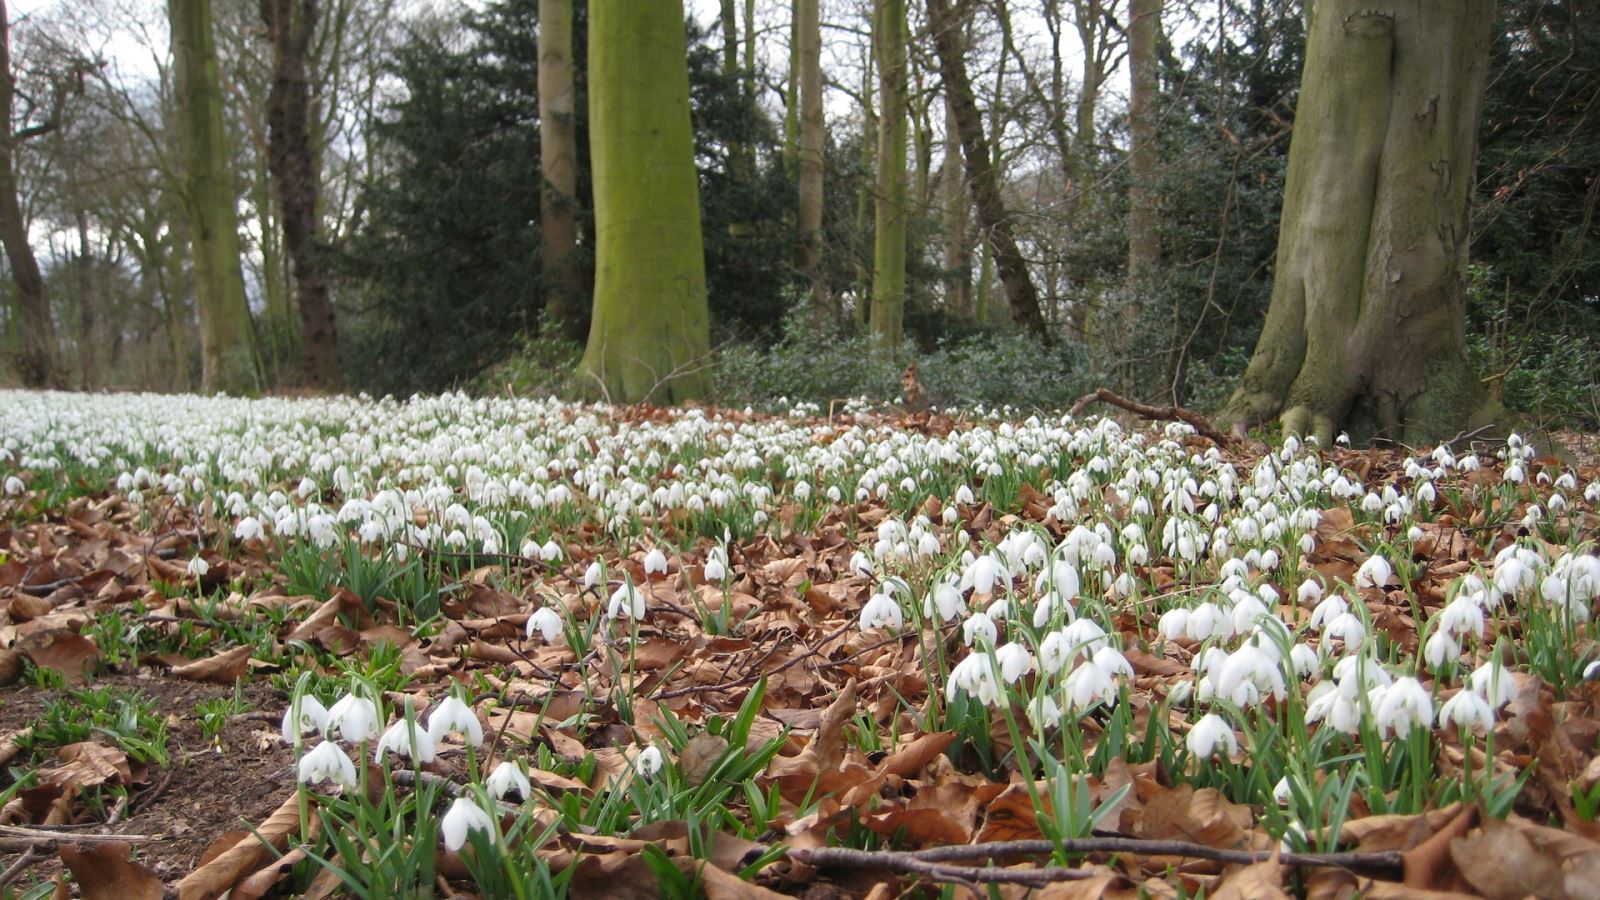 Snowdrops at Warley Place, Brentwood, Essex